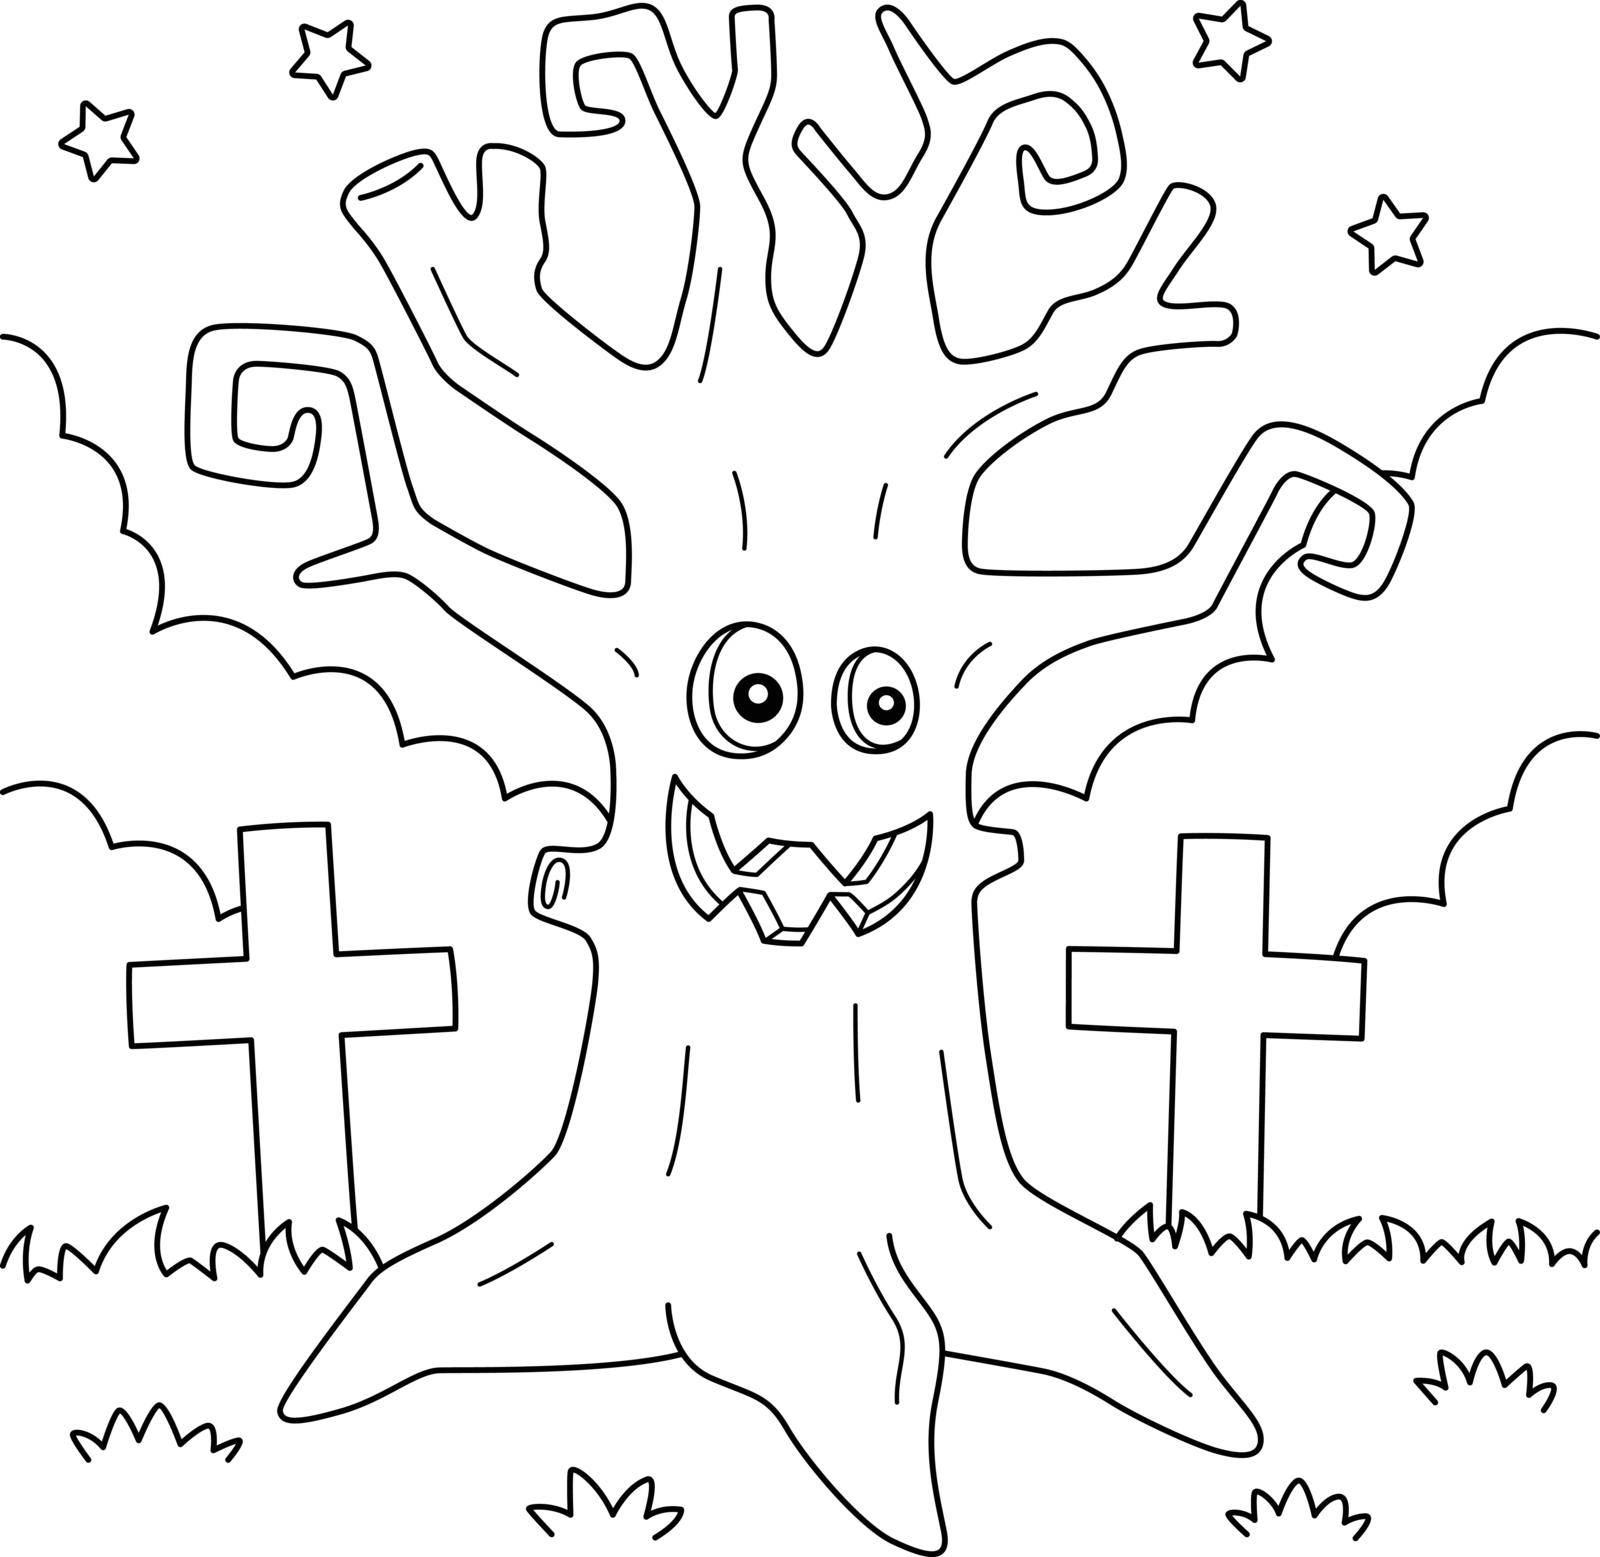 A cute and funny coloring page of a scary tree halloween. Provides hours of coloring fun for children. To color, this page is very easy. Suitable for little kids and toddlers.